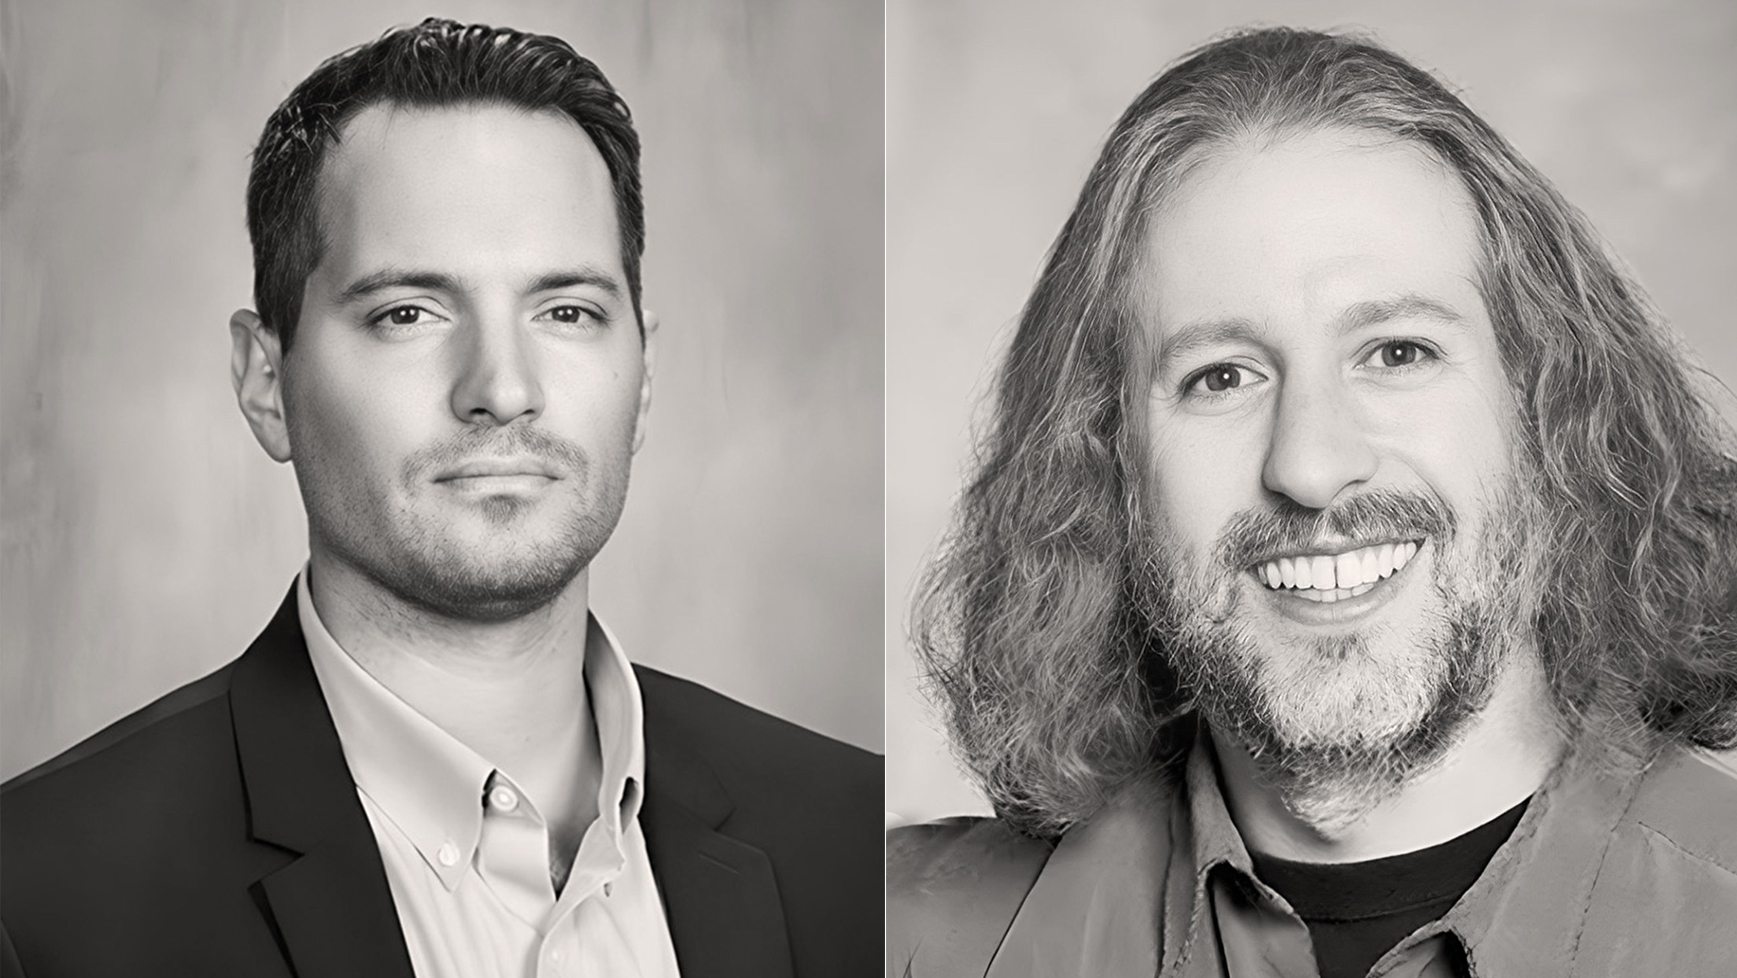 official portraits of founder Johnson and director david schwartz